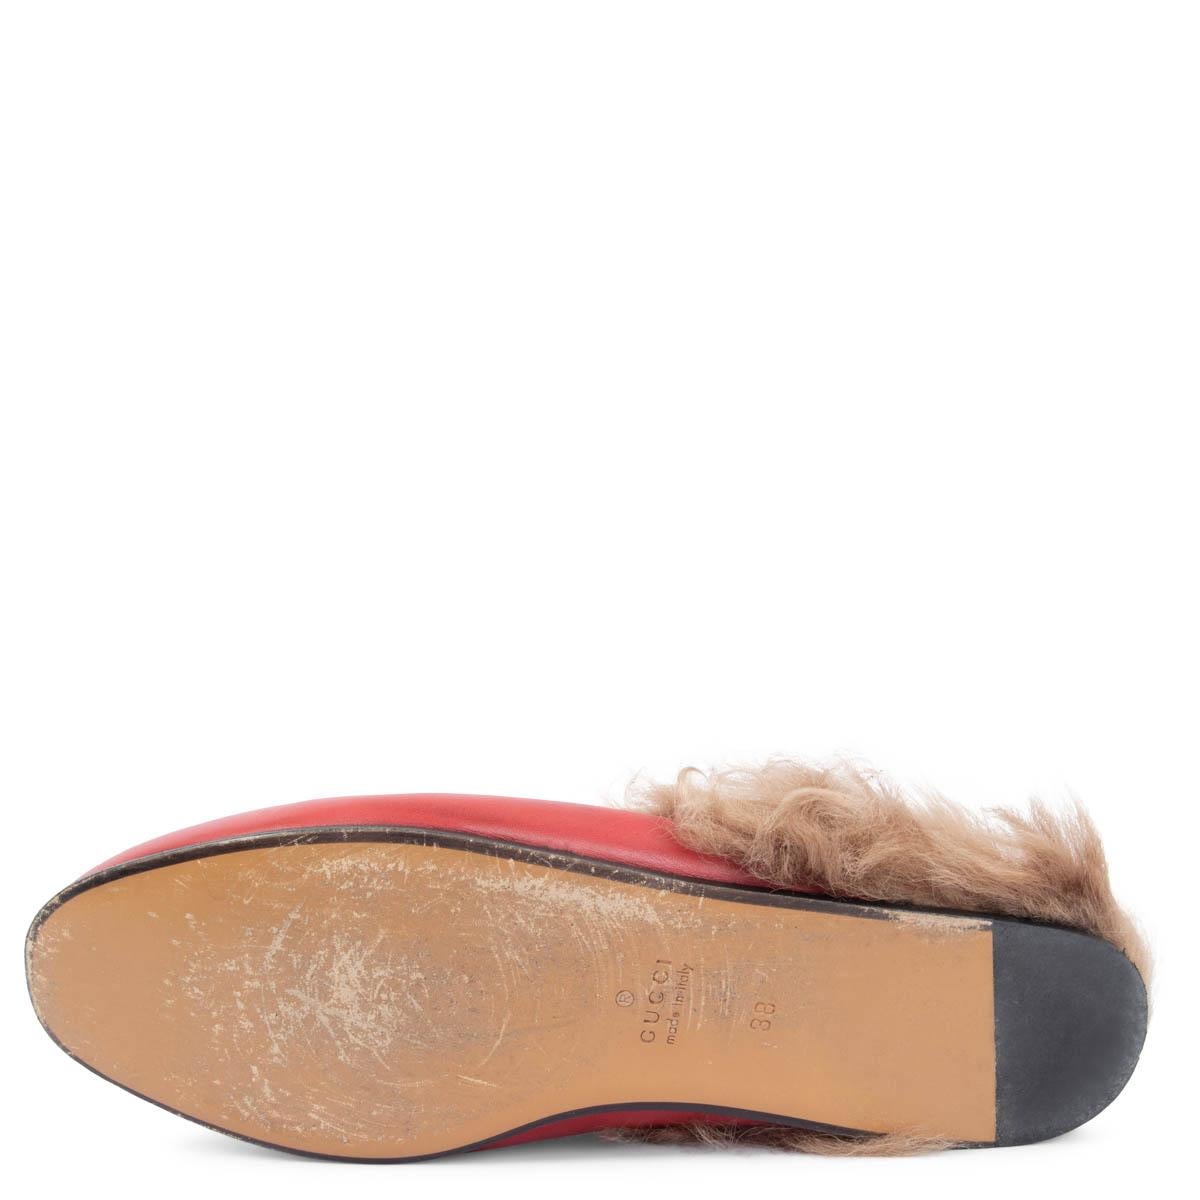 GUCCI red leather FUR TRIM PRINCETOWN Slippers Flats Shoes 38 4